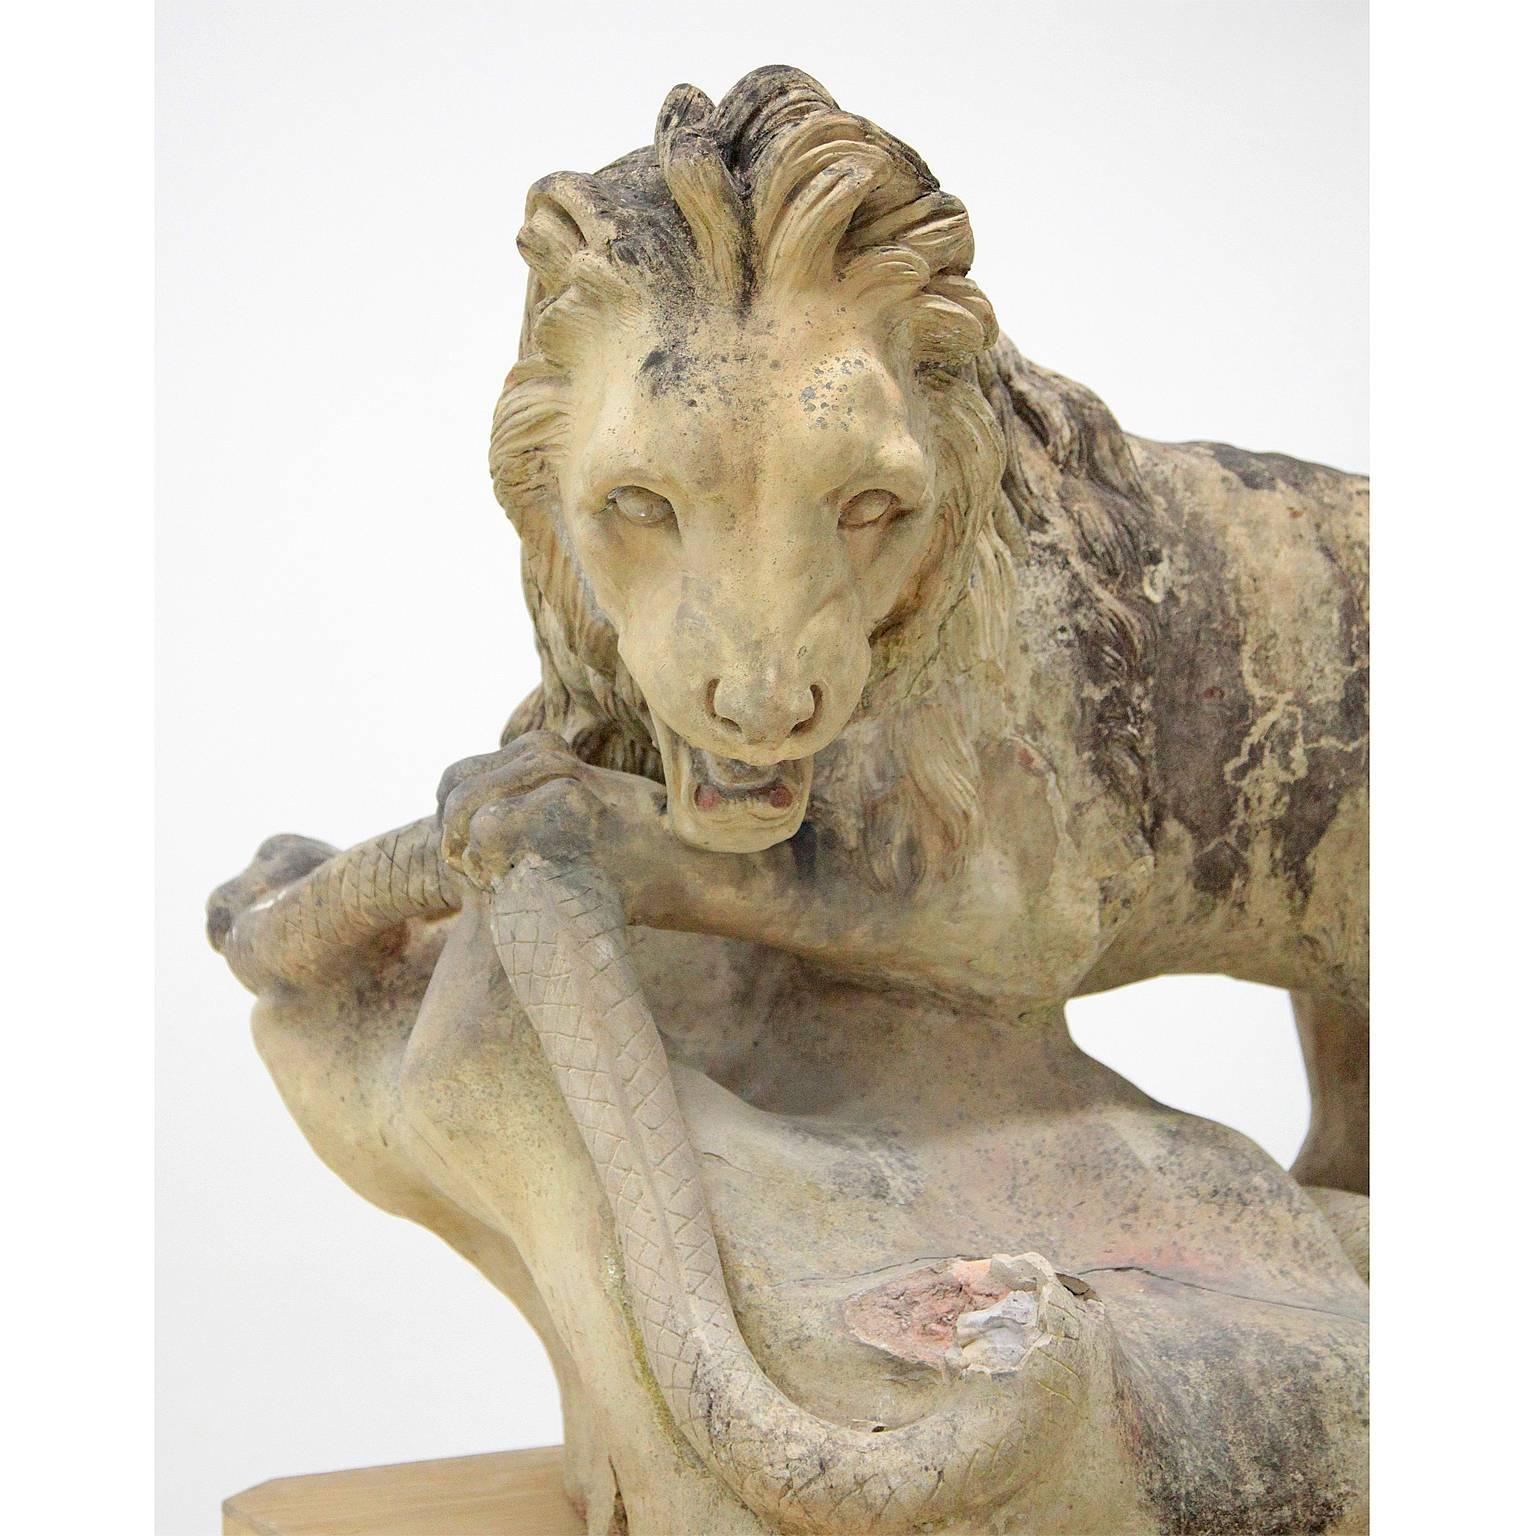 Naturalistic and complementary designed sculptures of lions on landscape bases with open mouths in a tense and belligerent posture. The lion has just caught a snake and is about to fight it, while the lioness has a suckling pup underneath her. The